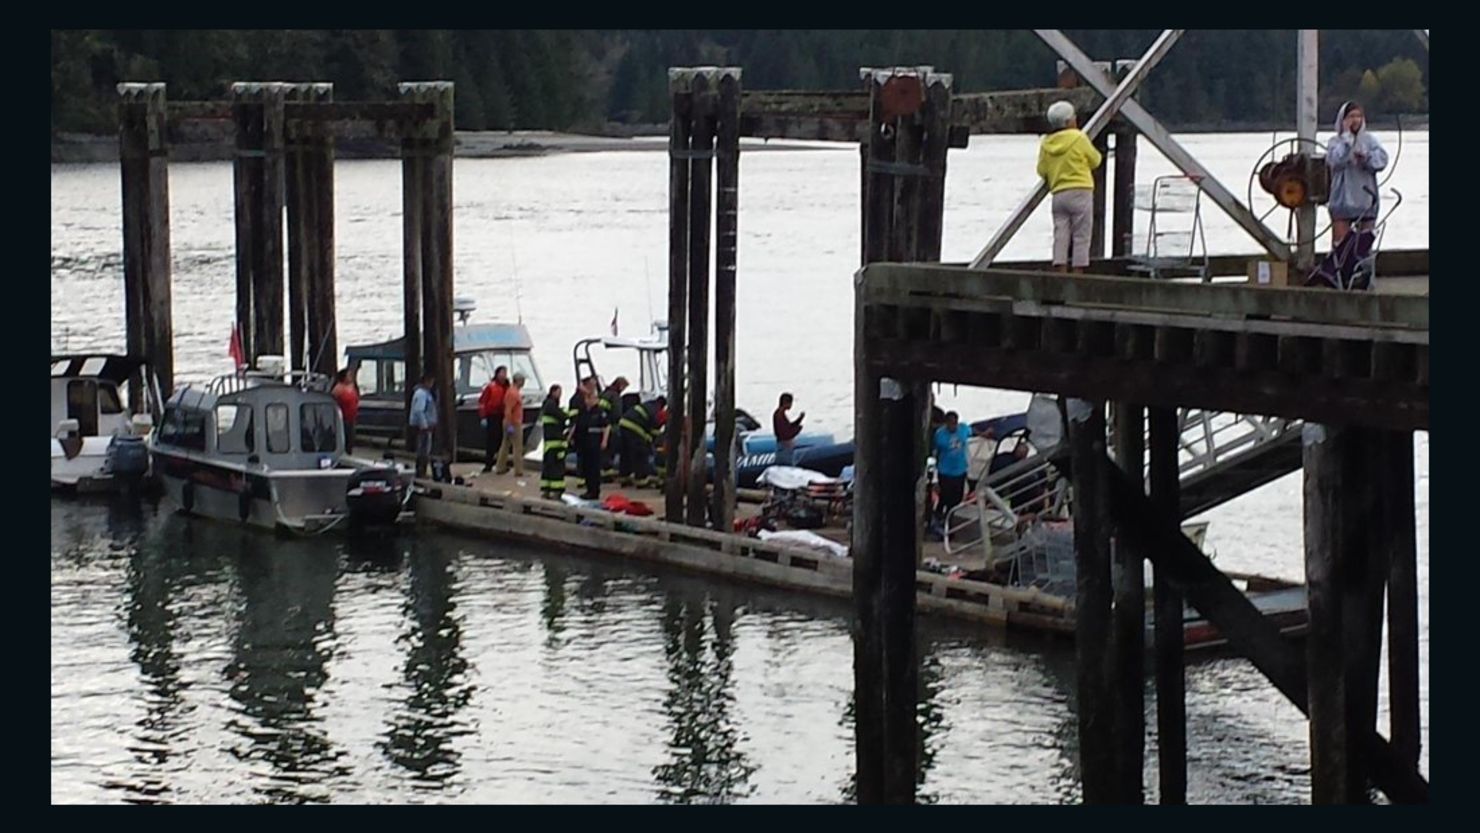 A tour boat carrying 27 people has sunk off the coast of Vancouver Island, in the Canadian province of British Columbia.